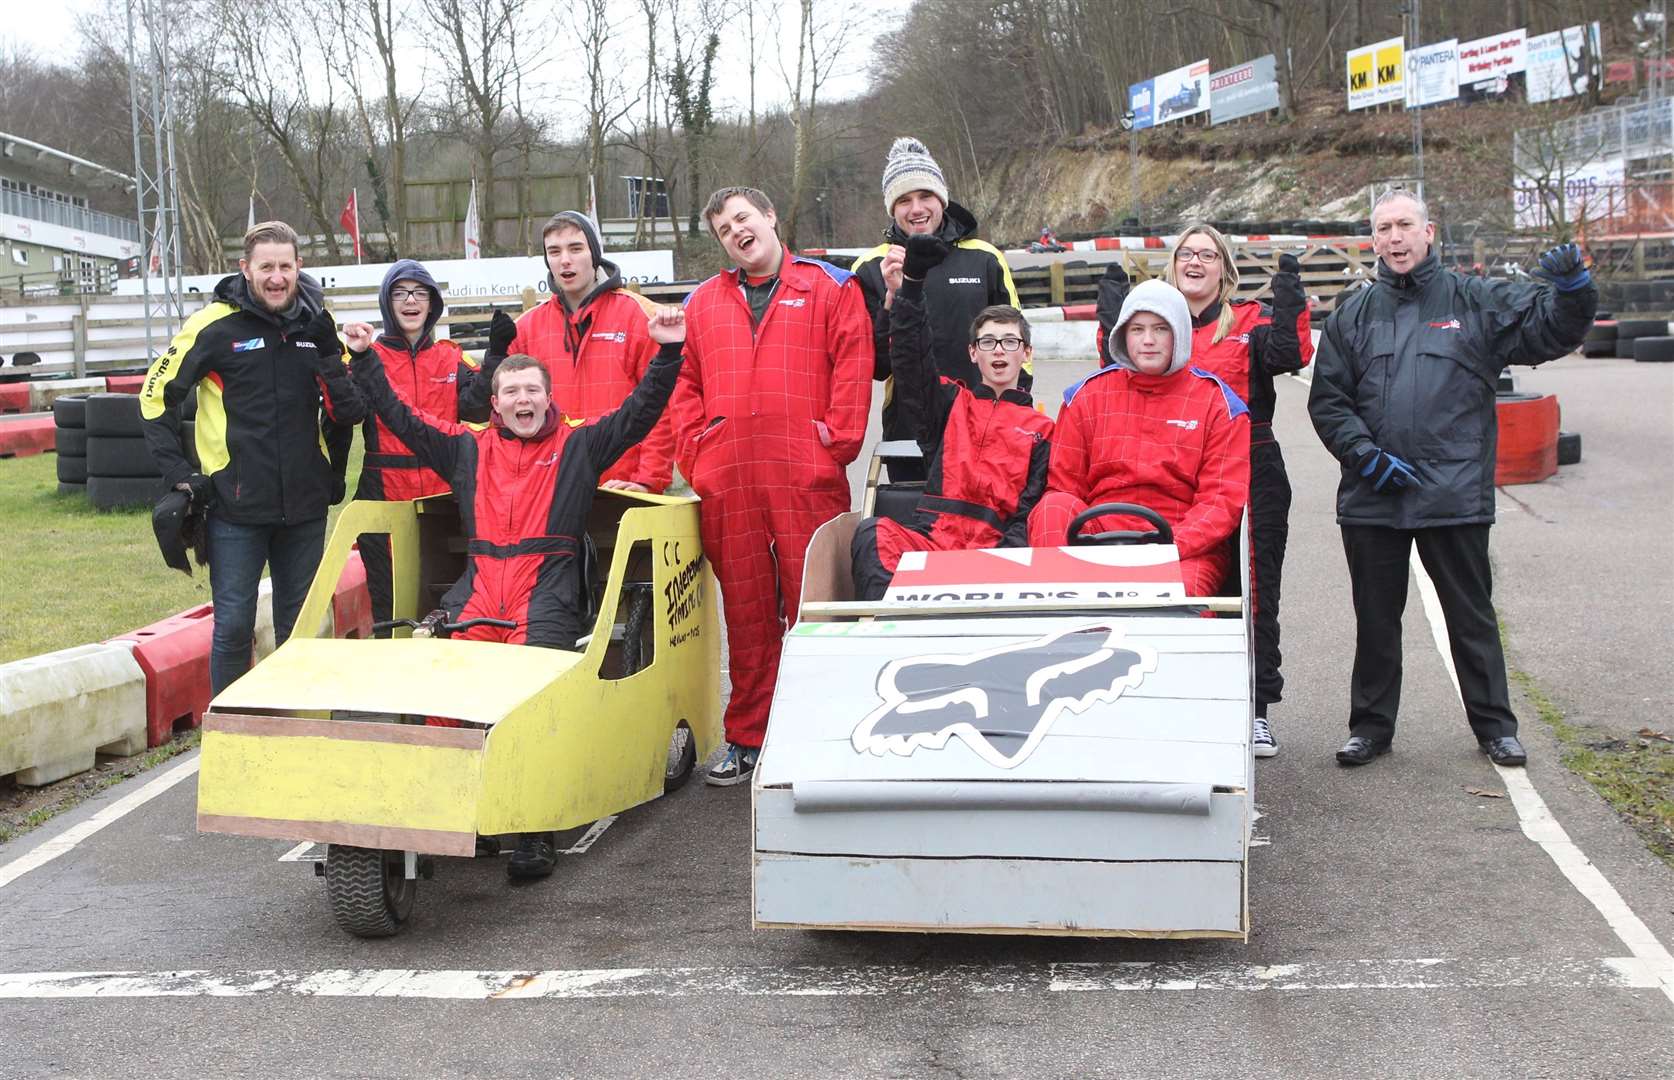 Two teams made up of Medway Youth Centre youngsters built two vehicles to race in 2015